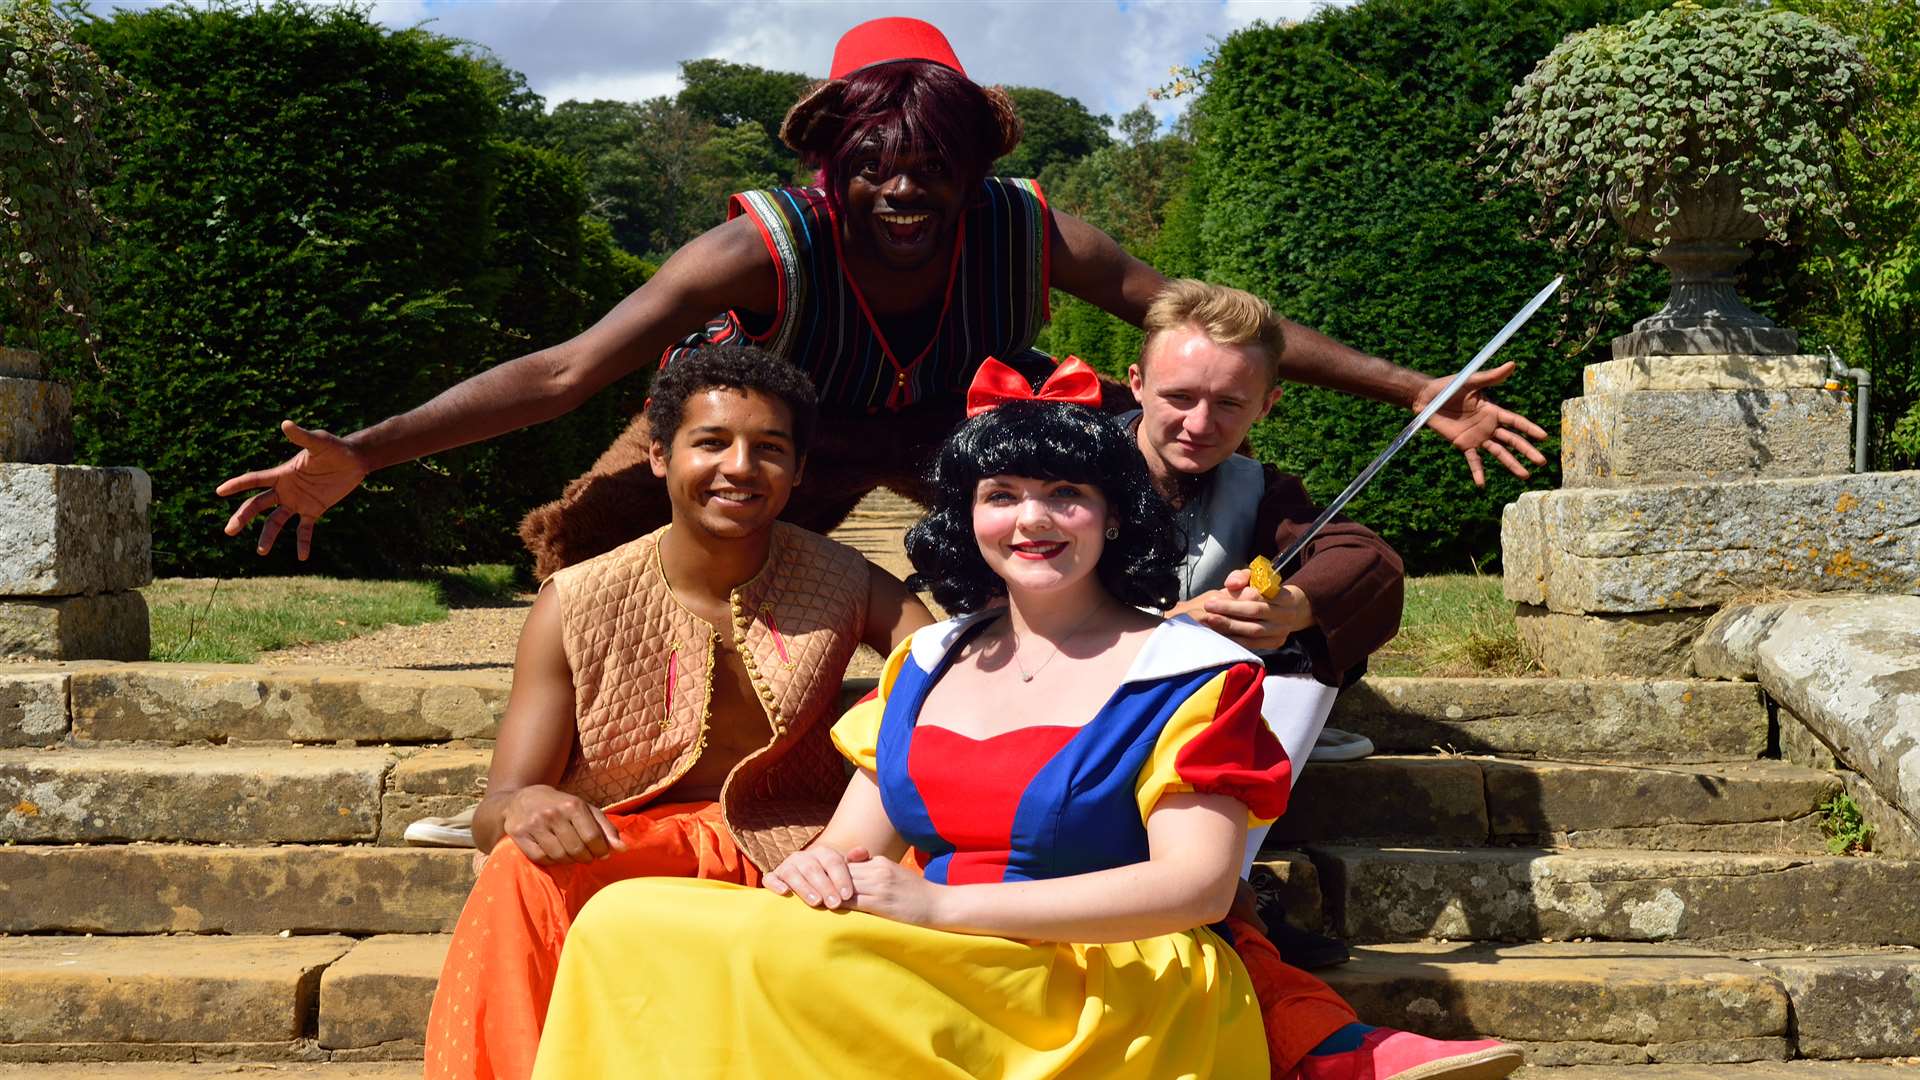 Meet some colourful characters at Groombridge Place